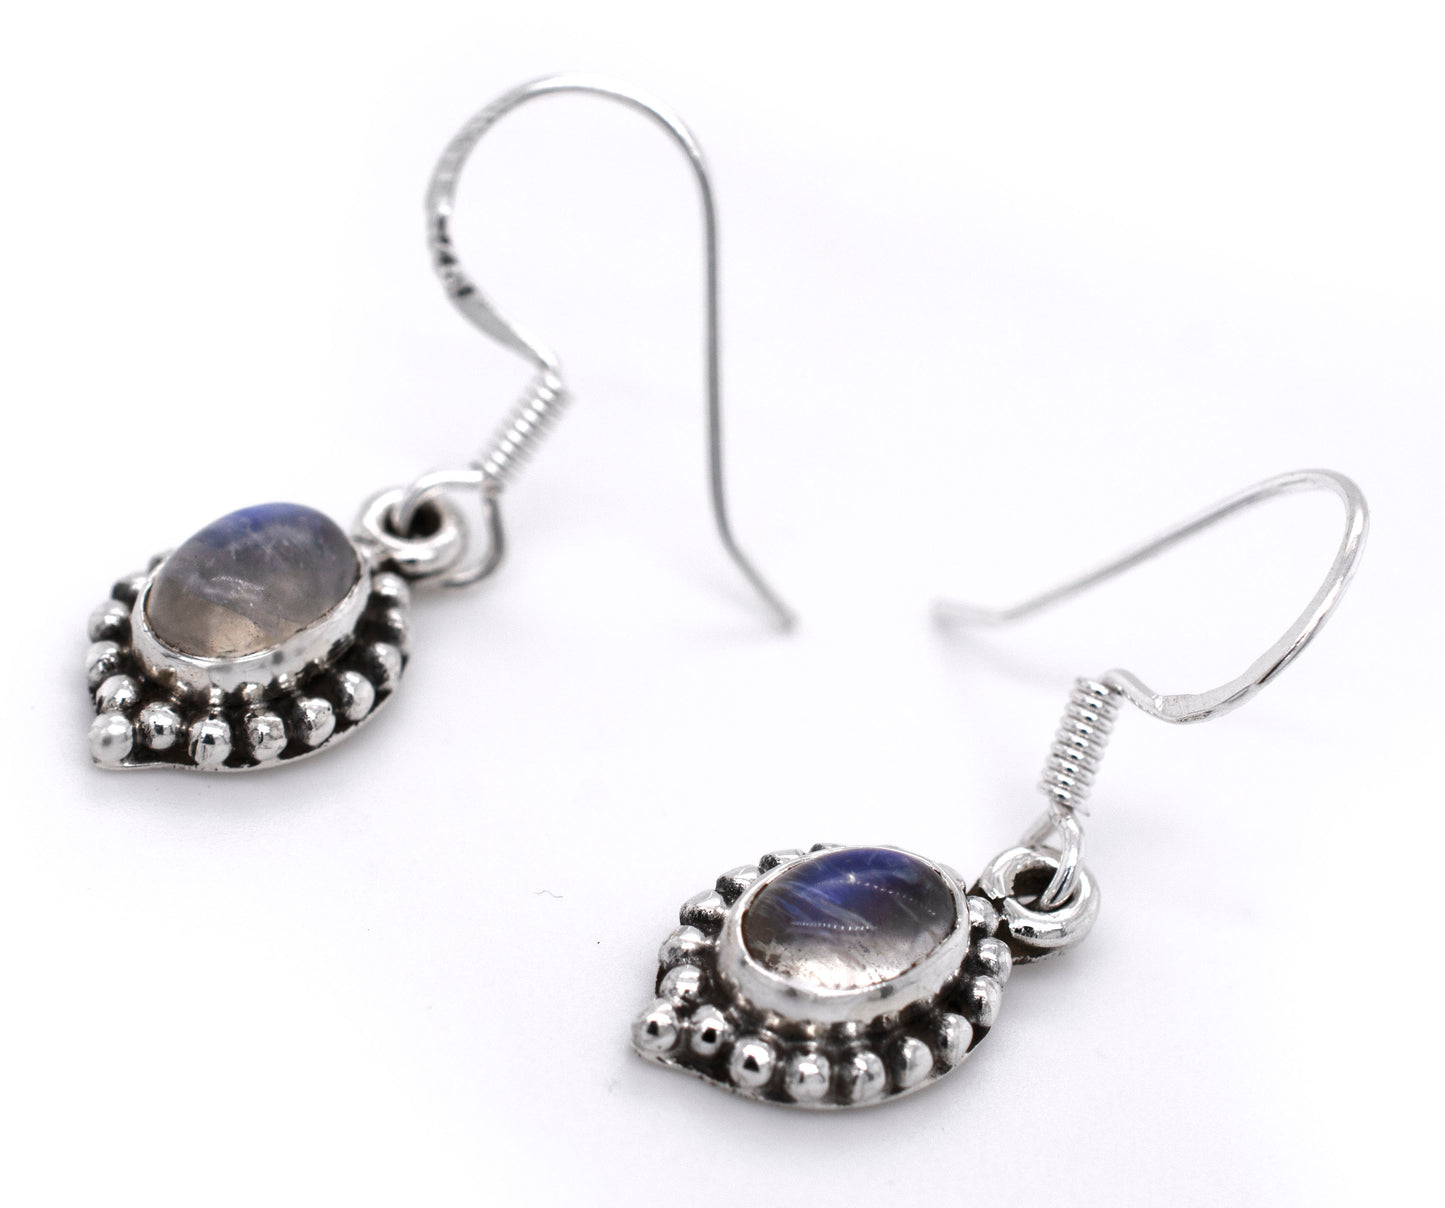 A pair of Dainty Moonstone Earrings With Beaded Border from Super Silver.